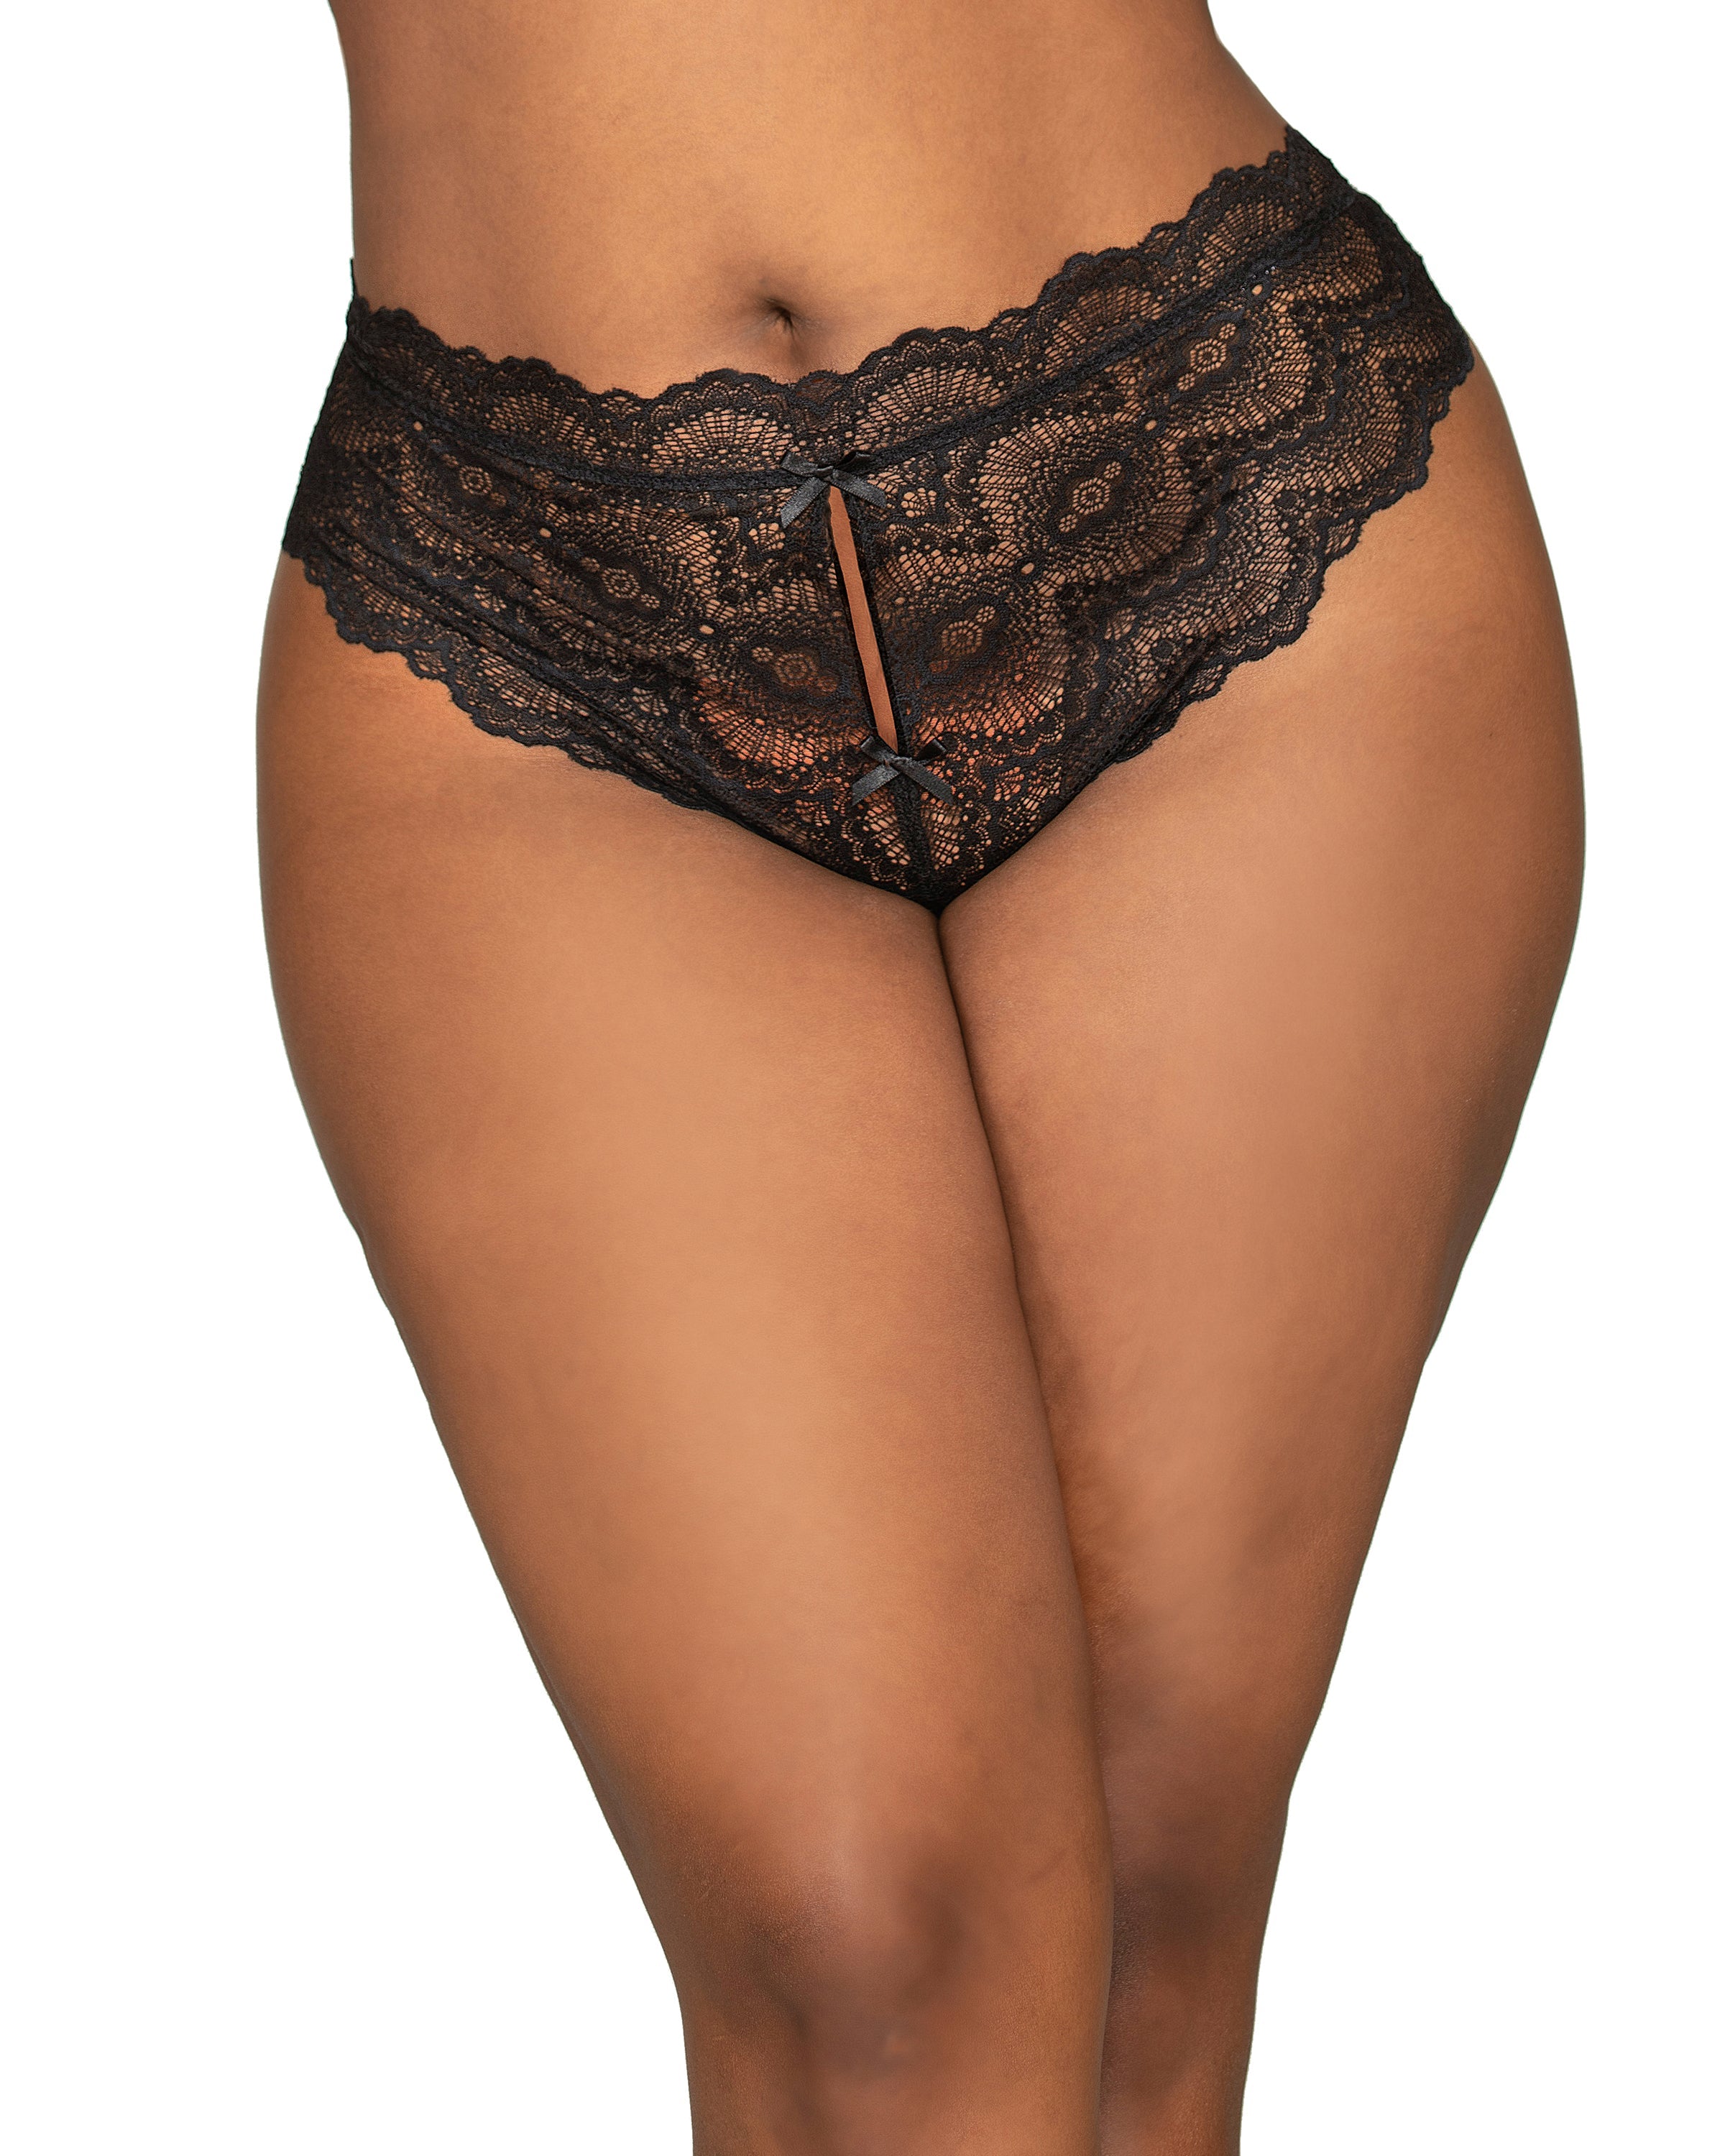 Plus Size Lace Tanga Open Crotch Panty with Open Back Detail Dreamgirl International 